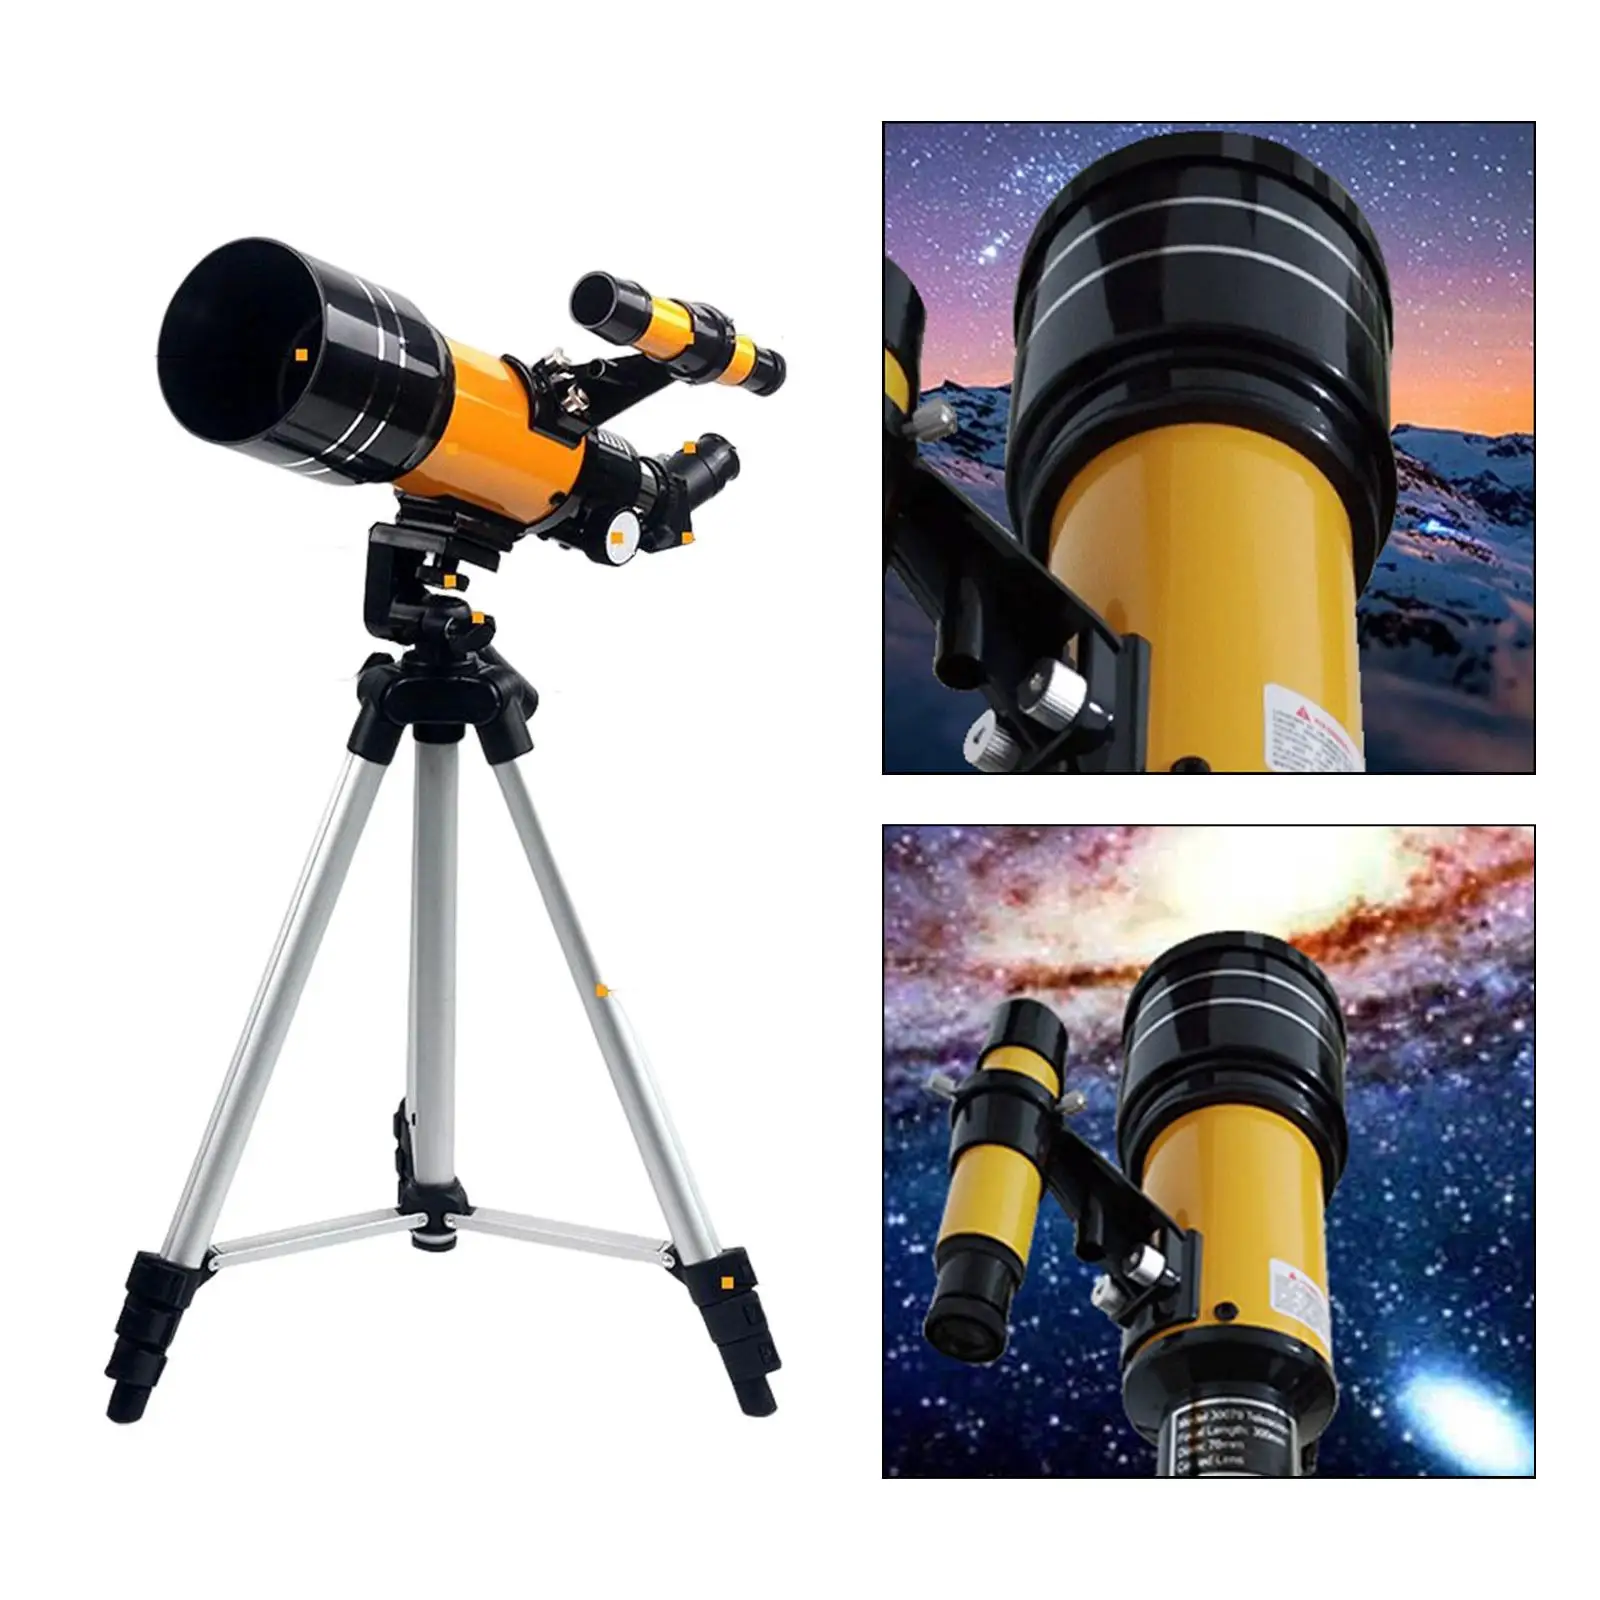 Travel Telescope 70mm apertures 300mm Fully Multi Coated with Adjustable Tripod 150x Monocular Telescope for Kids Beginners